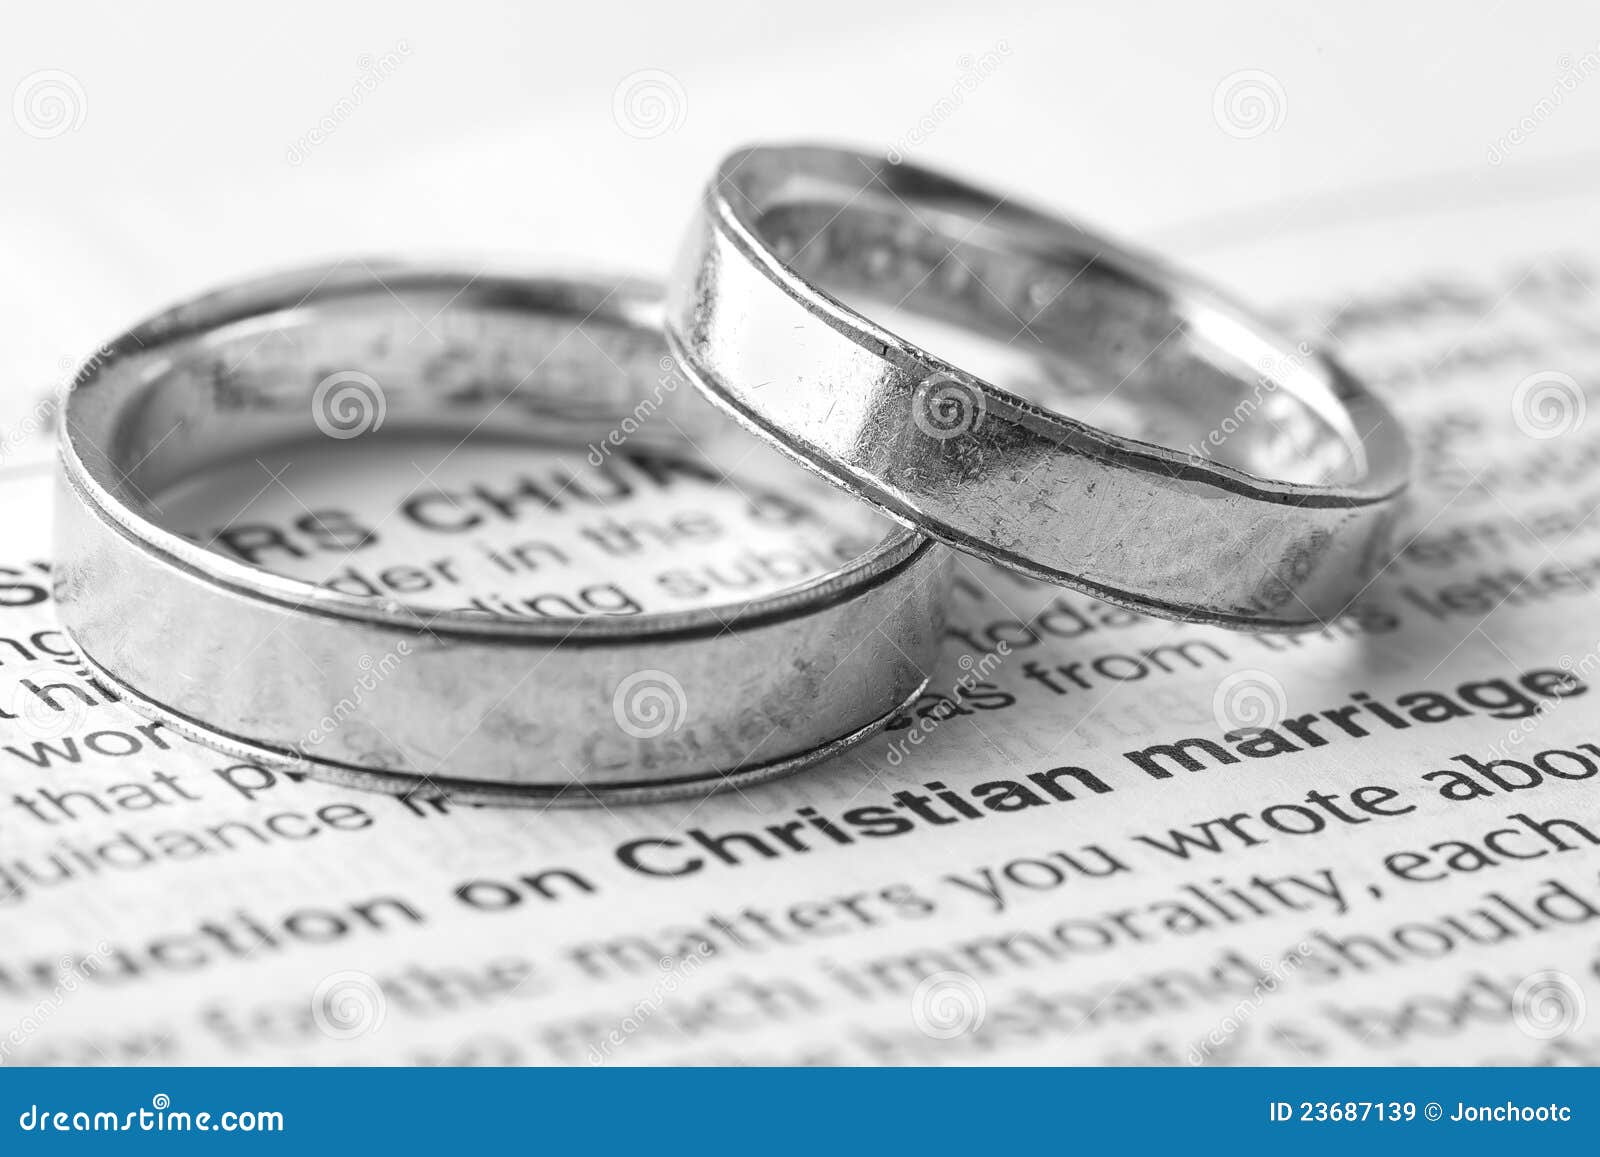 Christian marriage and dating